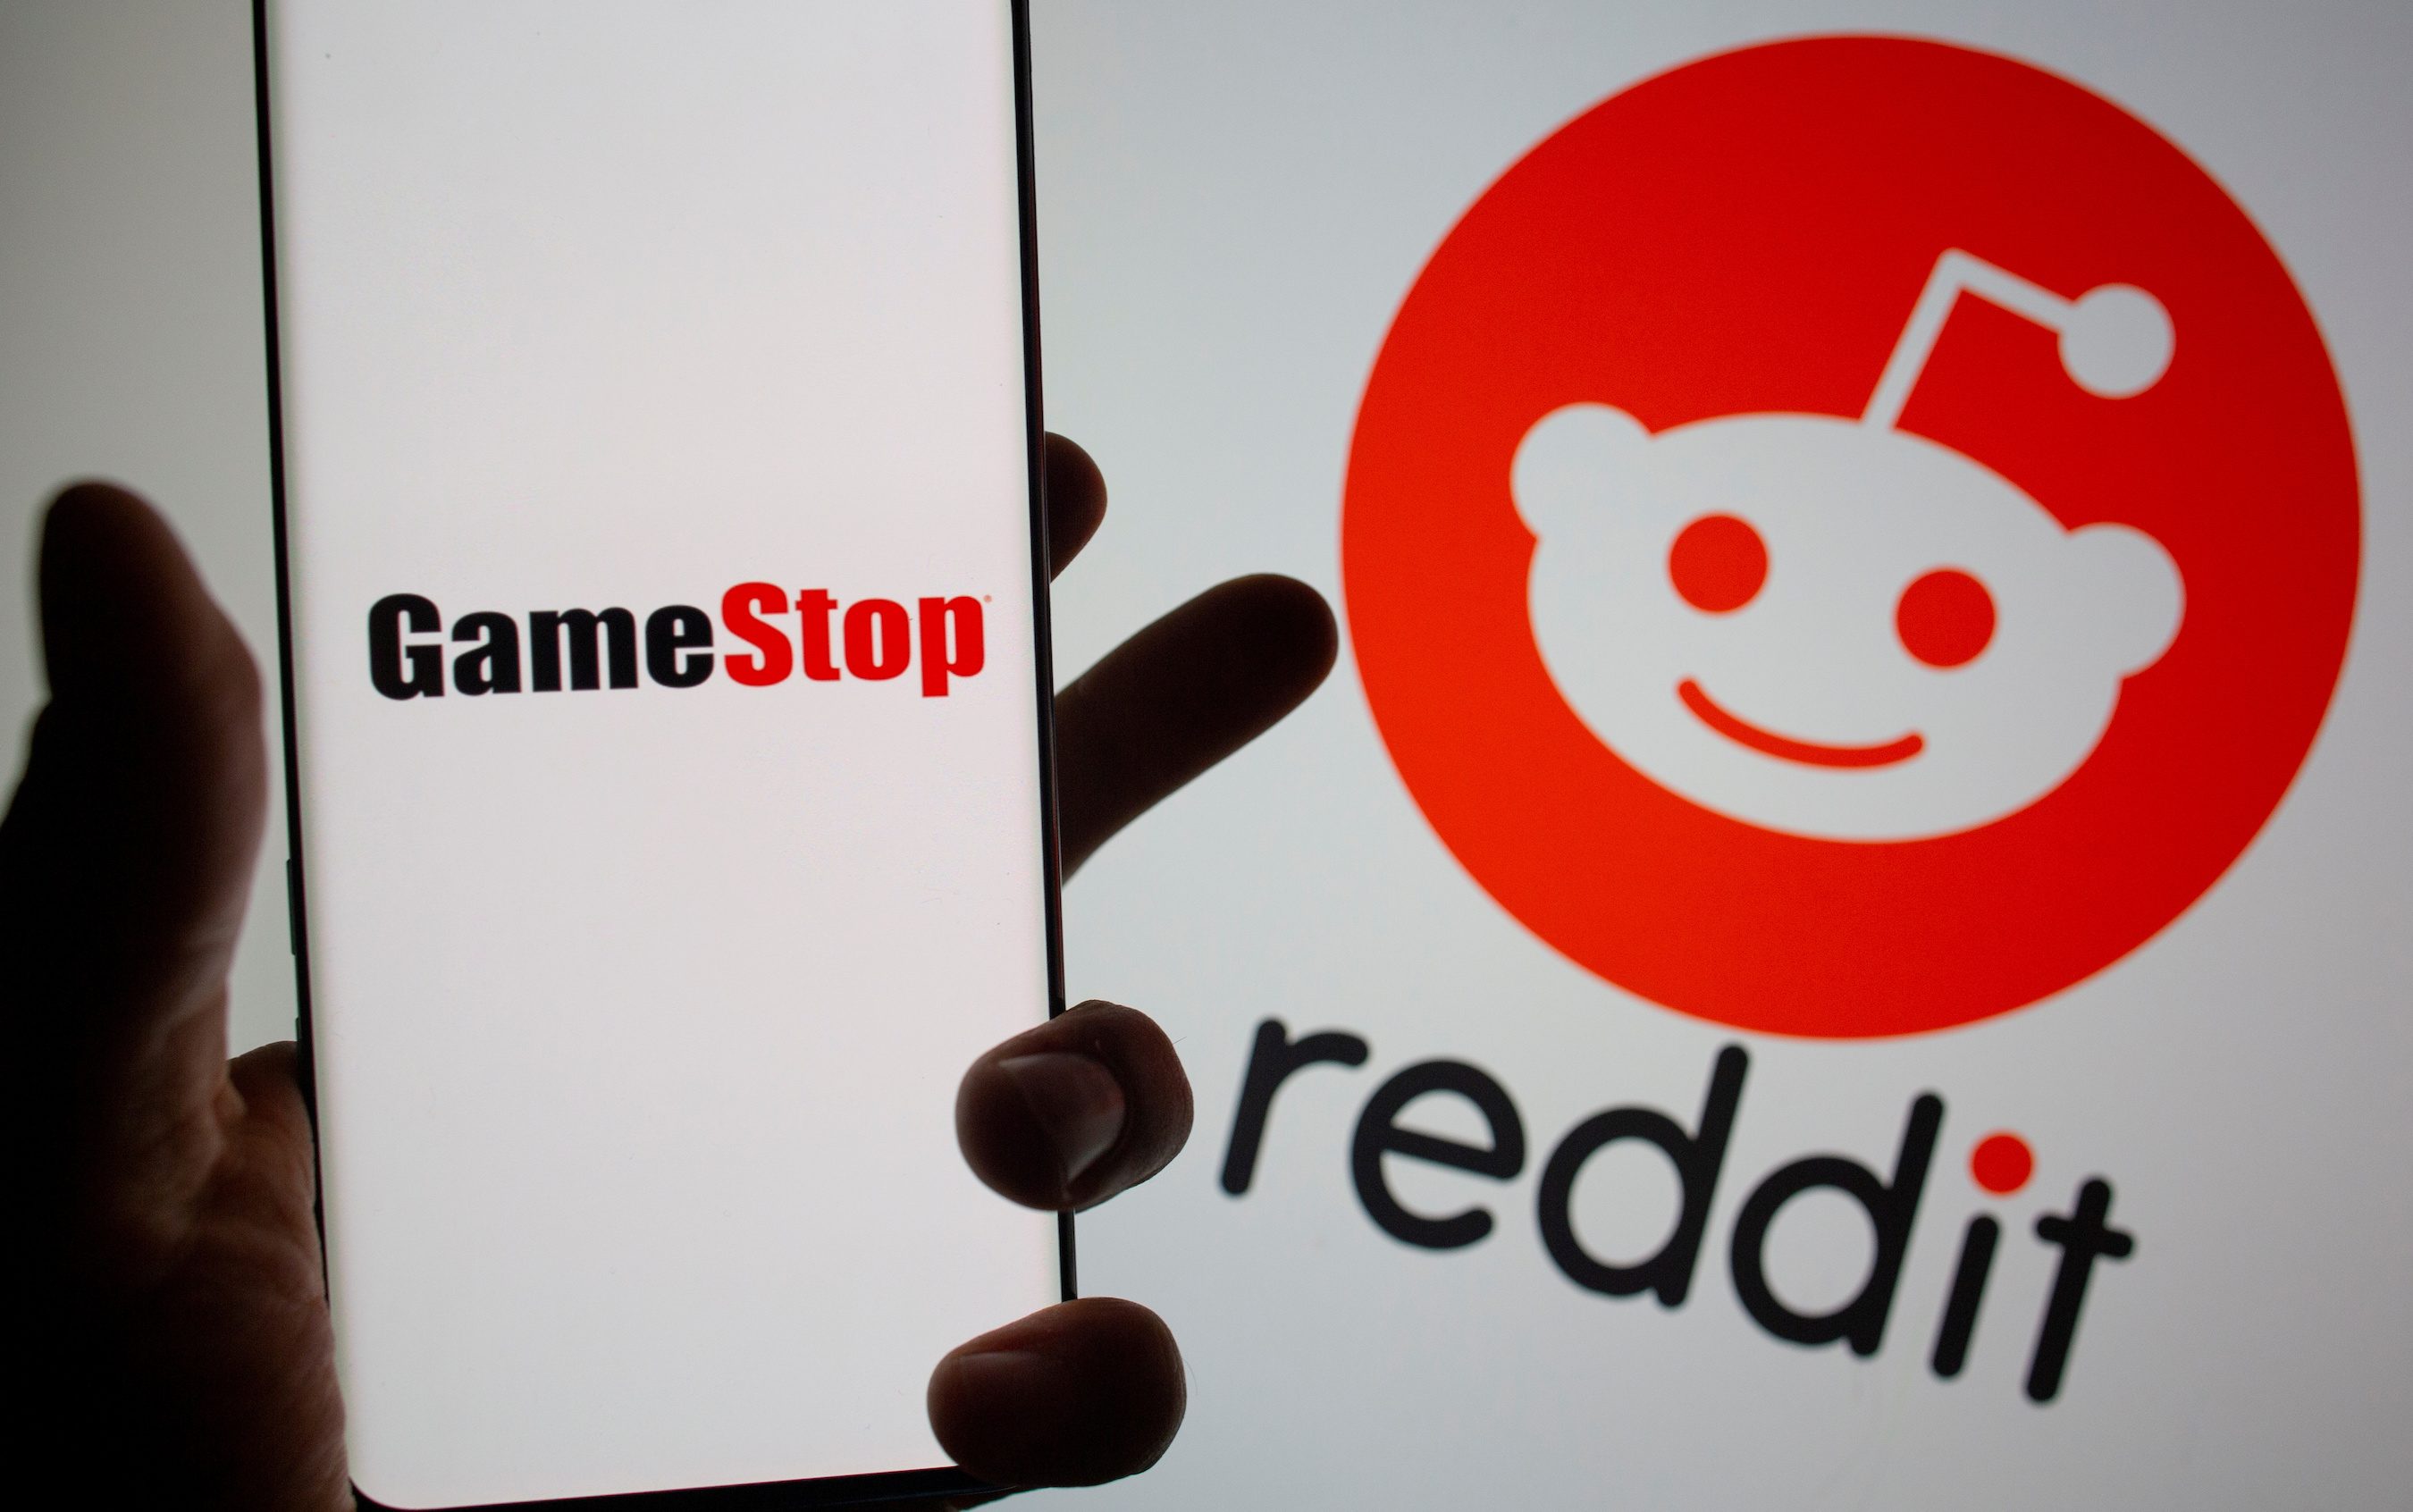 ‘To the moon’ or to a lawyer, GameStop investors cope with stock’s roller coaster